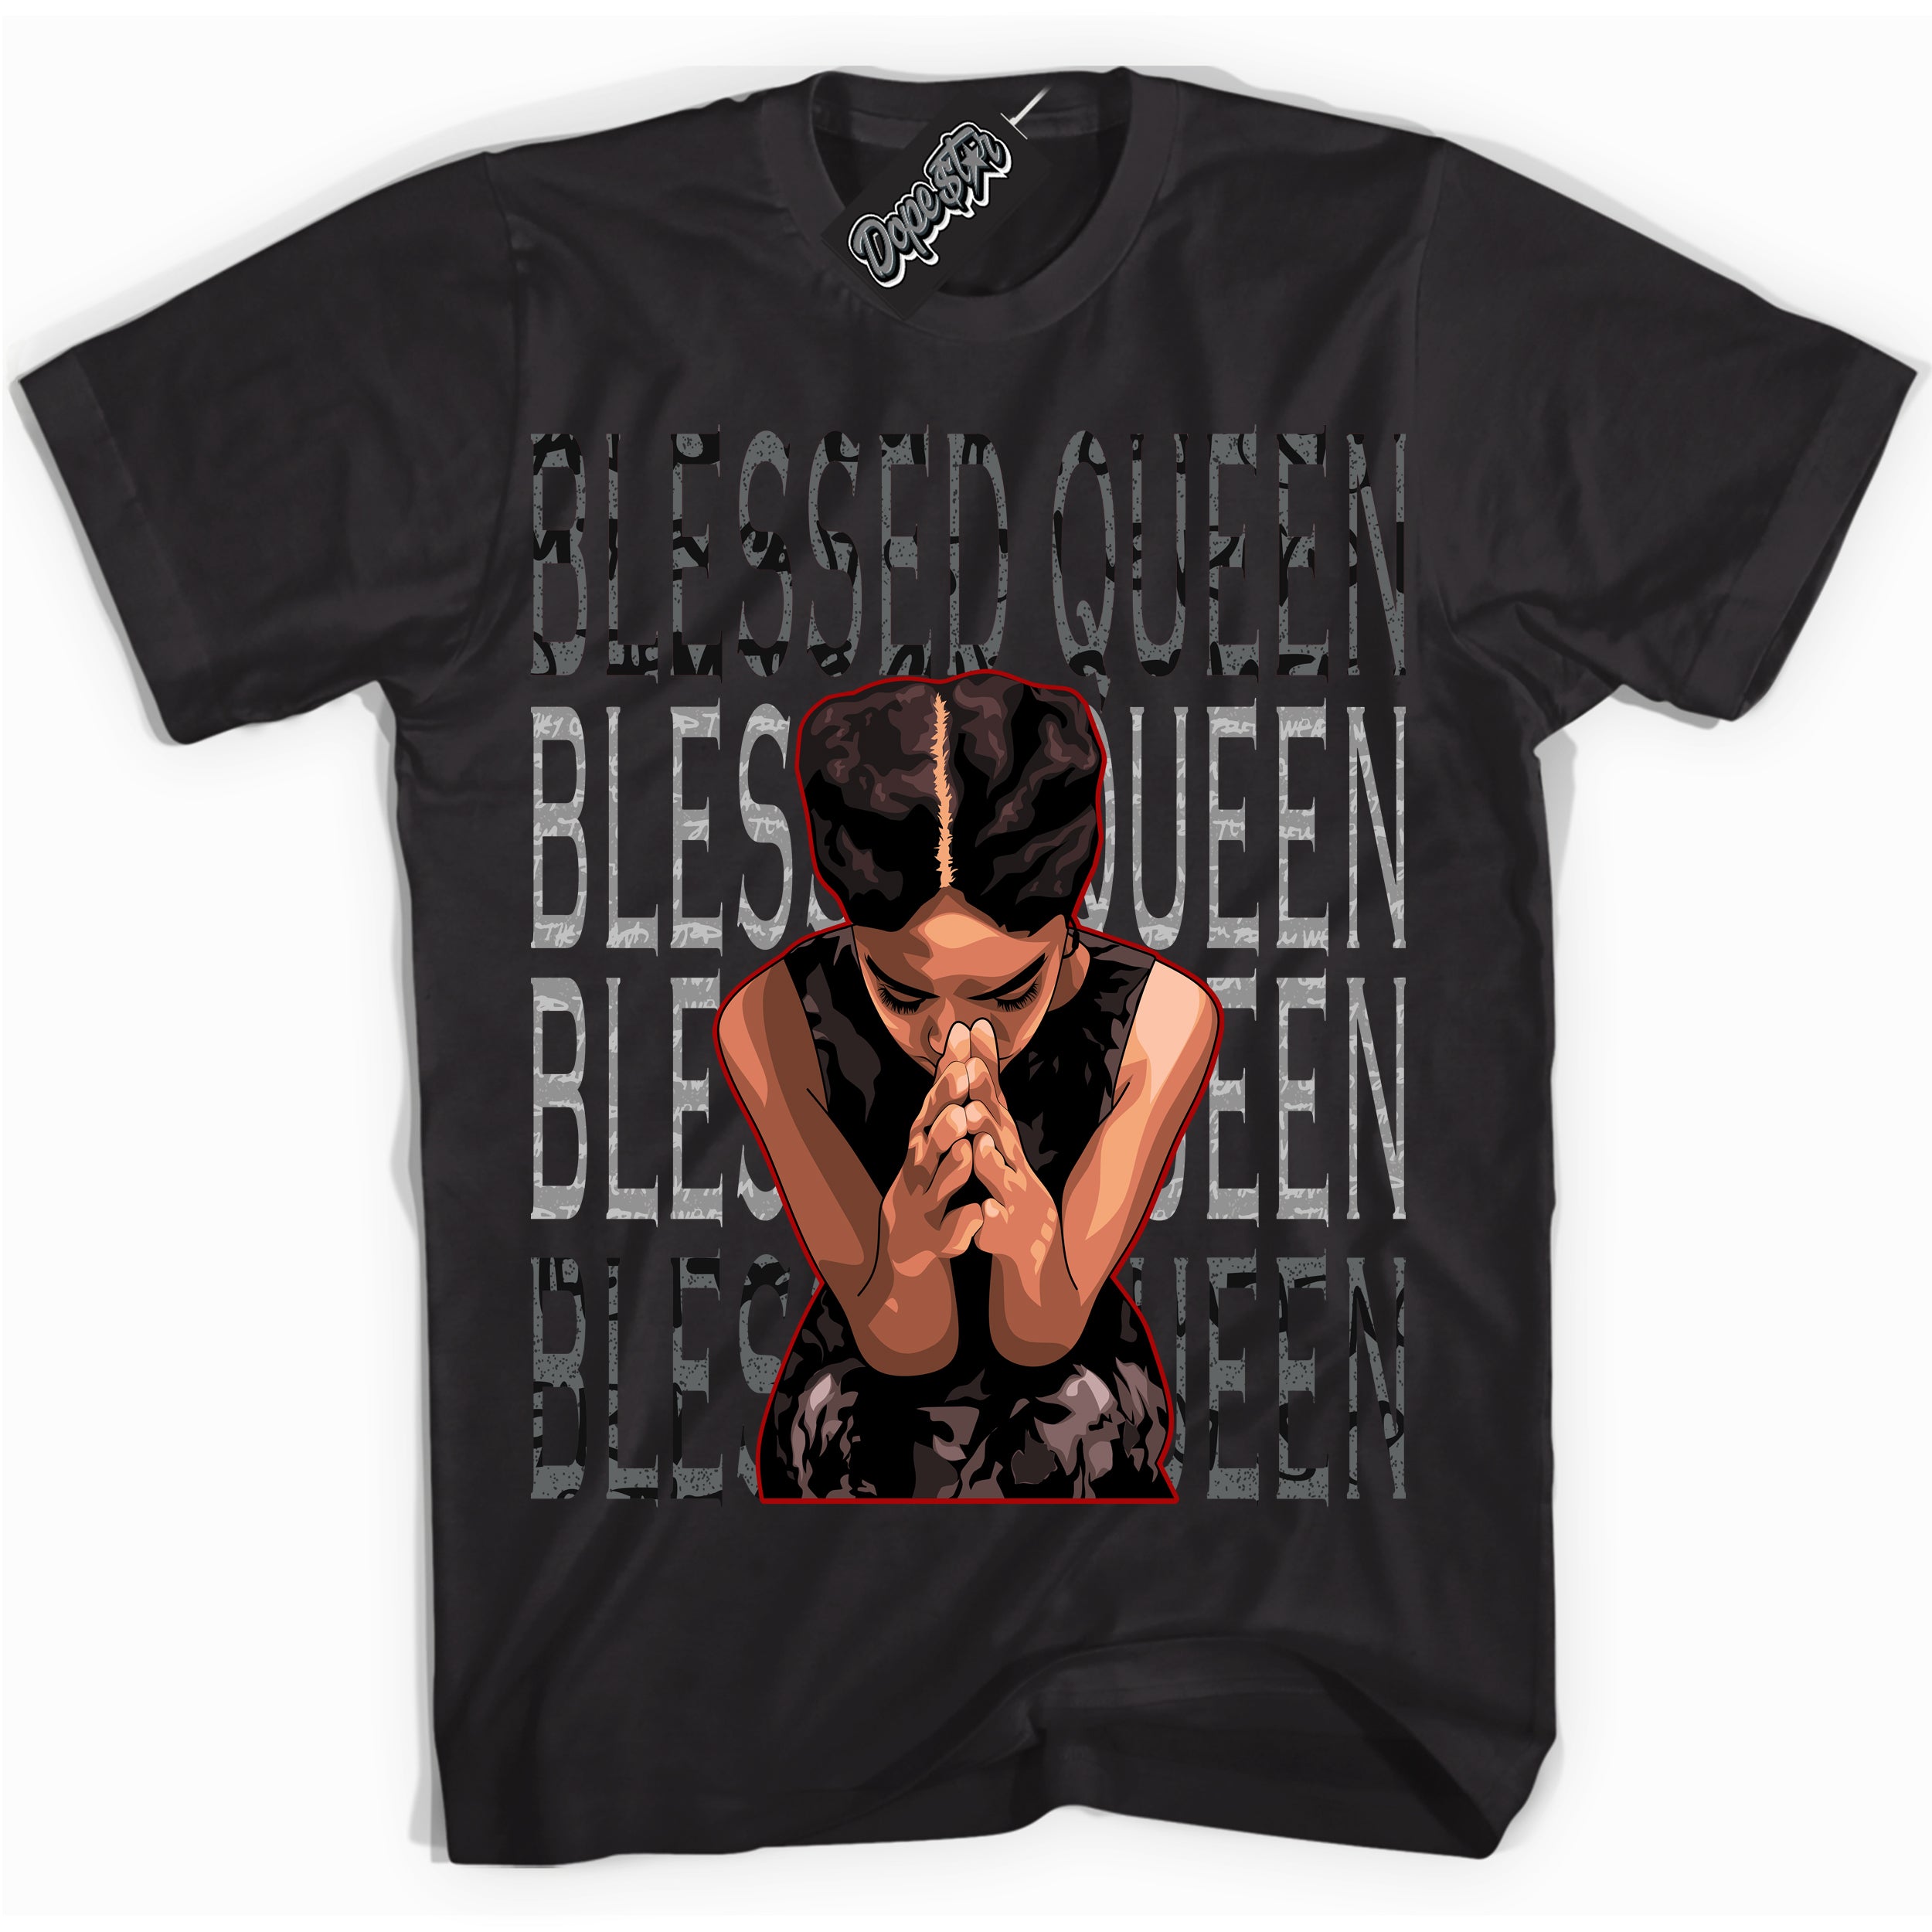 Cool Black Shirt with “ Blessed Queen ” design that perfectly matches Rebellionaire 1s Sneakers.